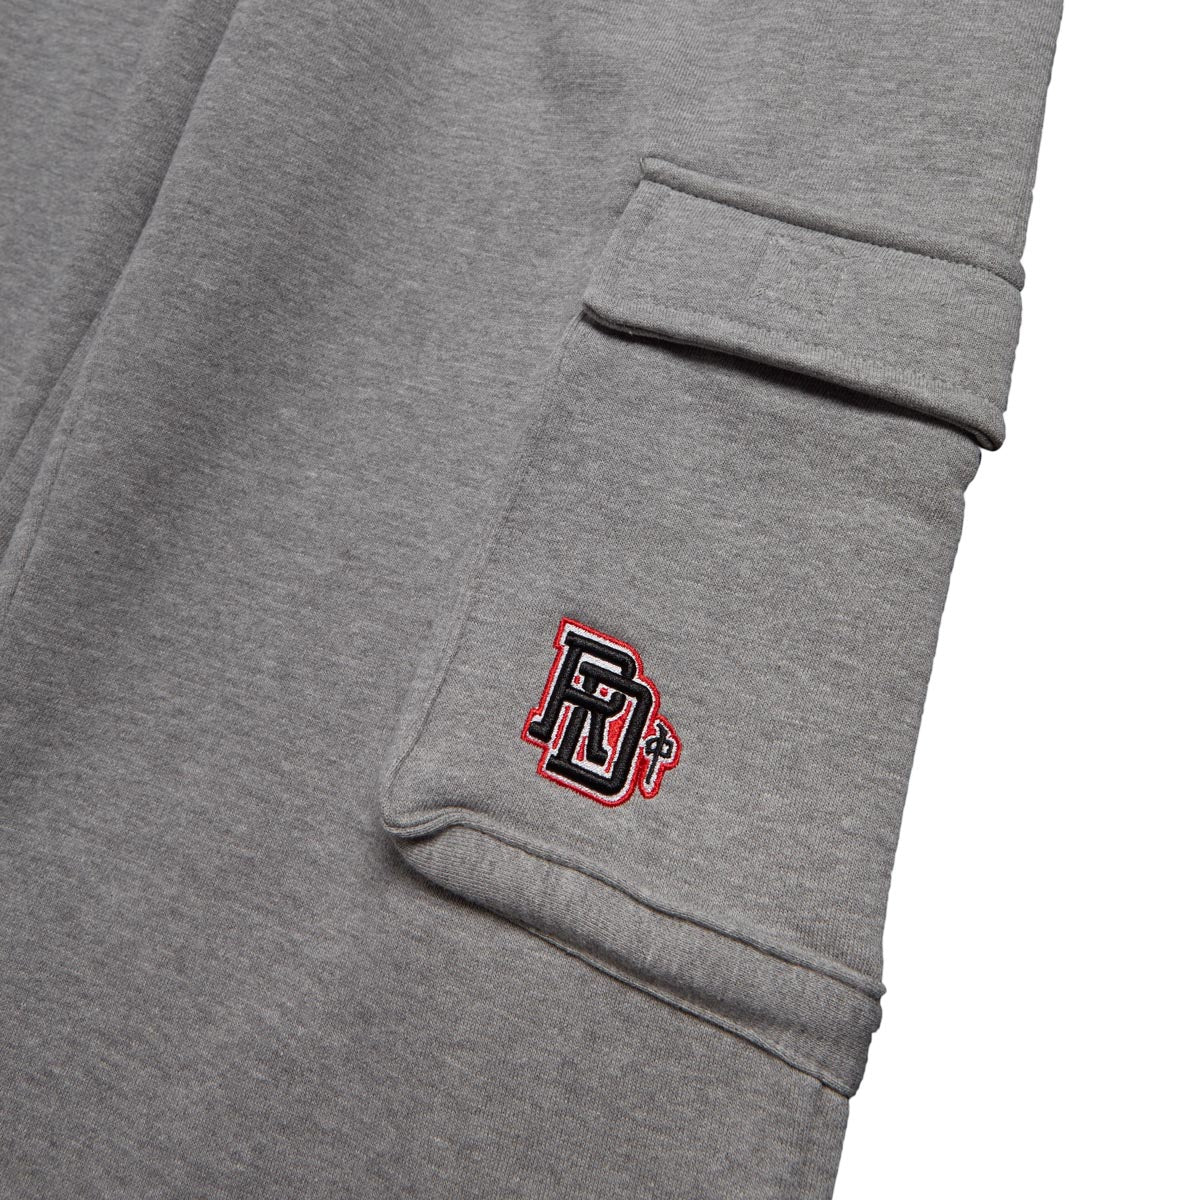 RDS 3d Monogram Cargo Sweat Pants - Athletic Heather/Red image 4